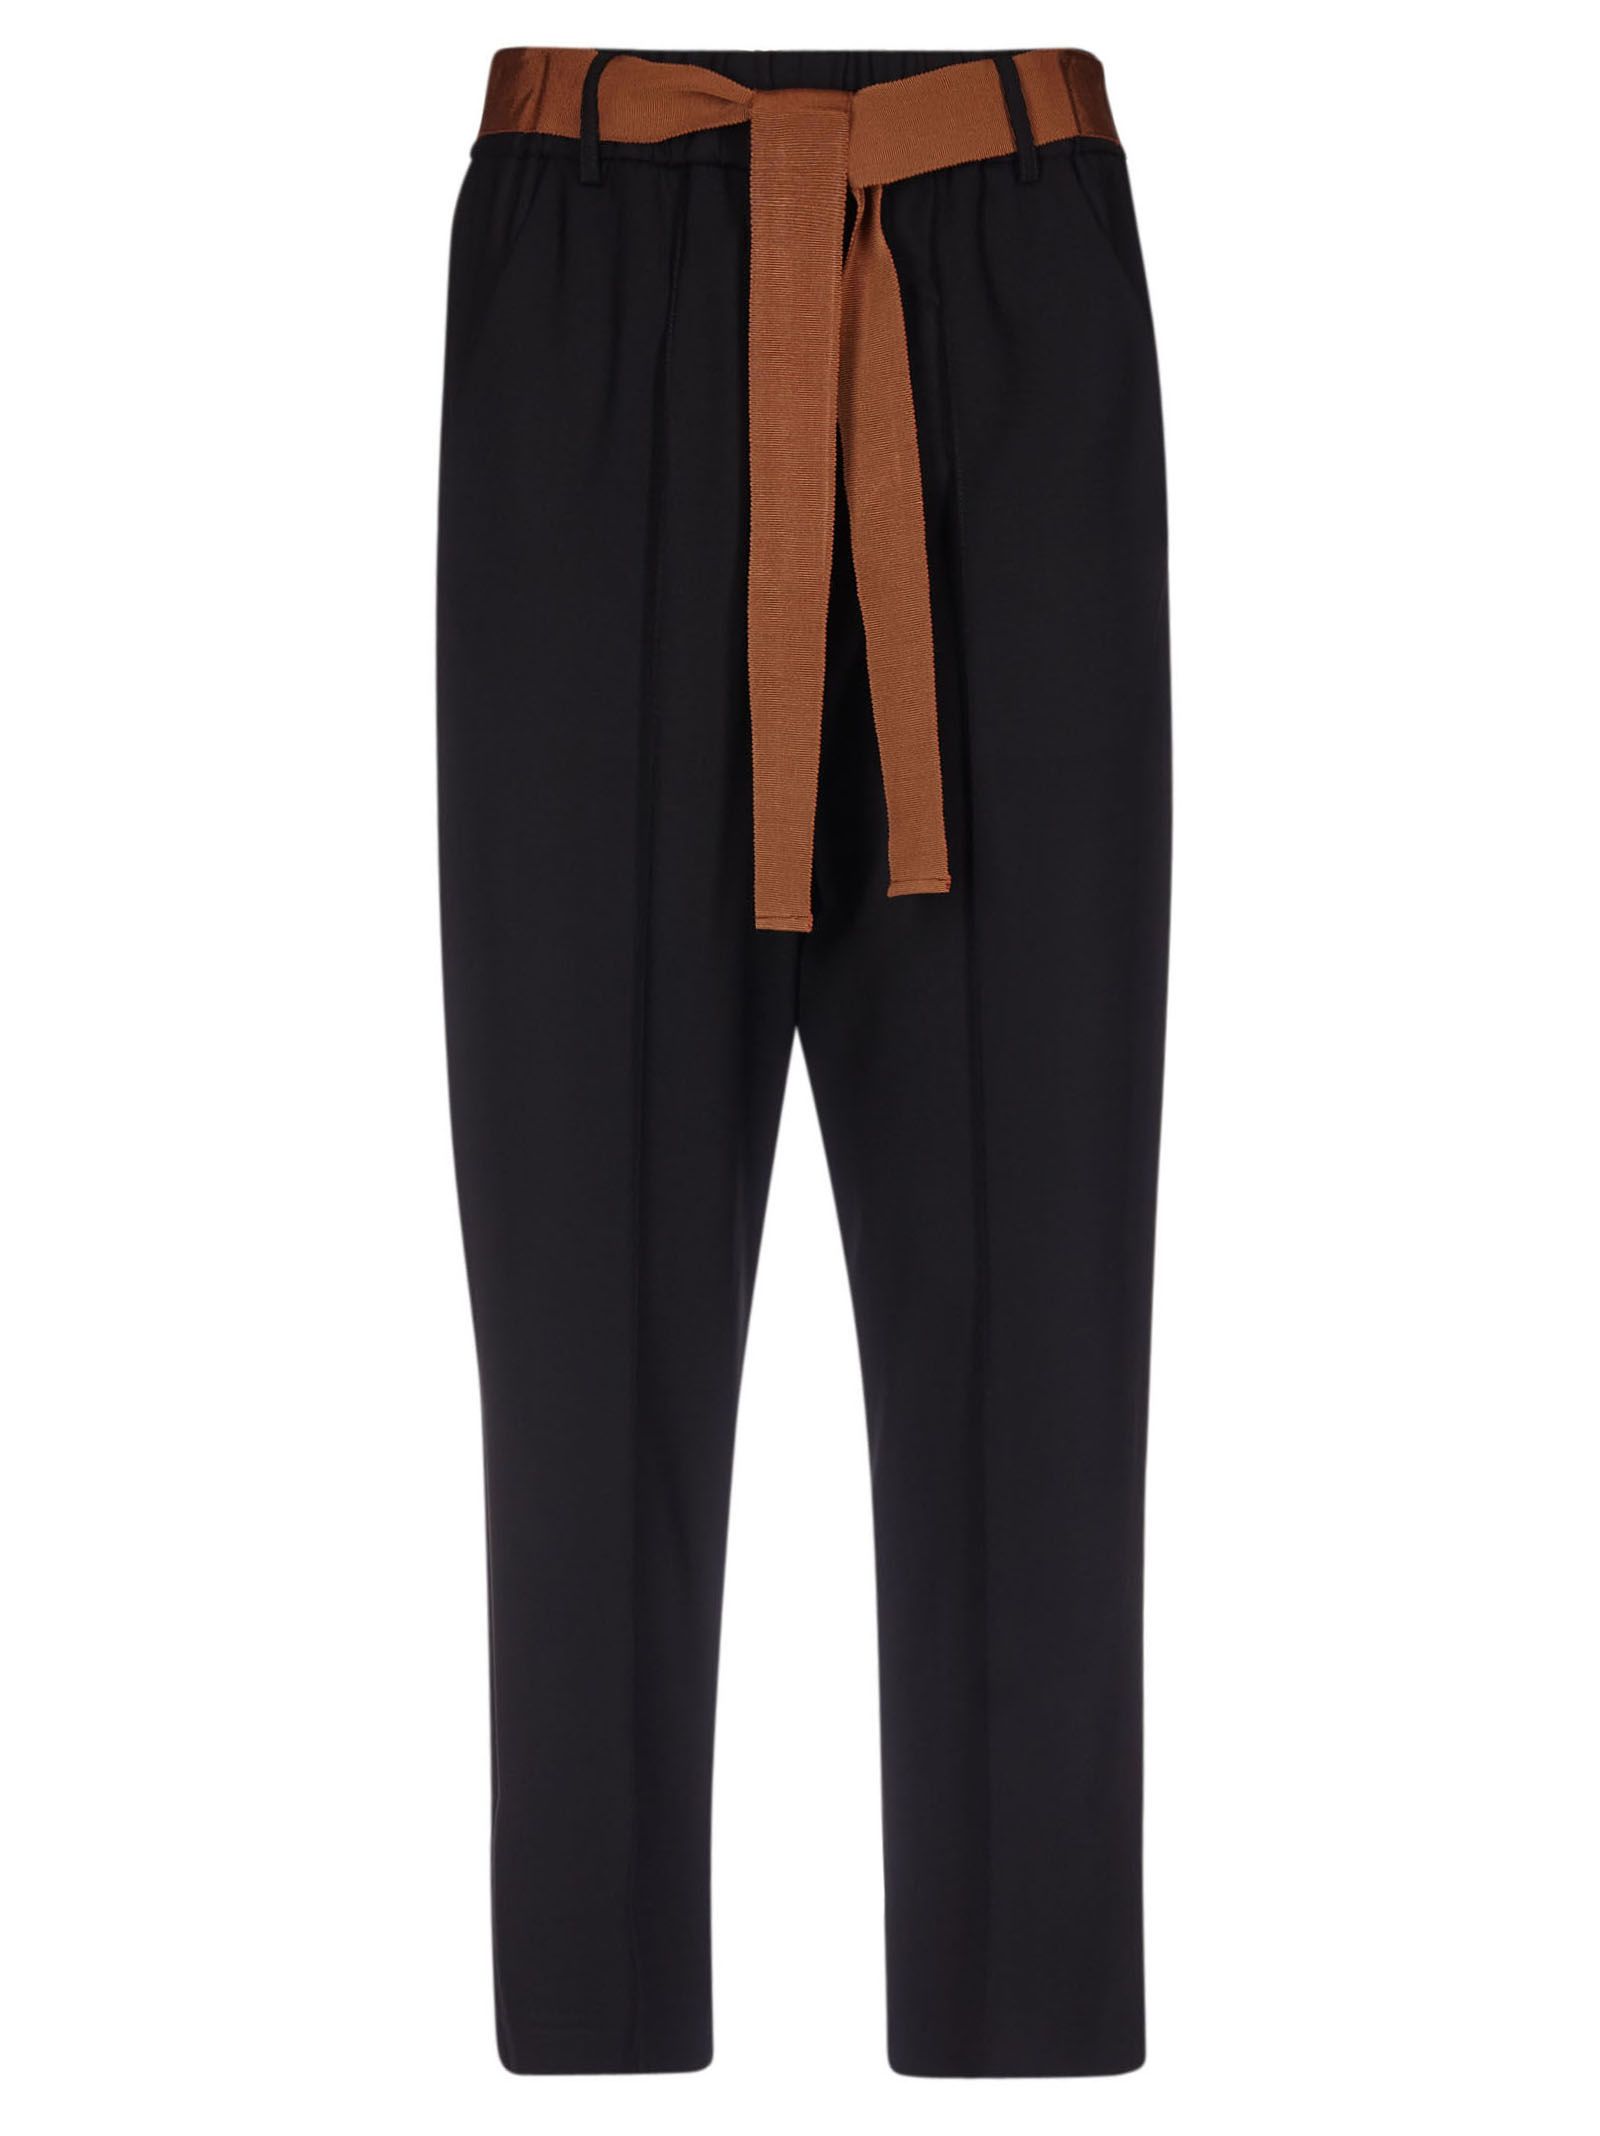 Alysi CROPPED TROUSERS